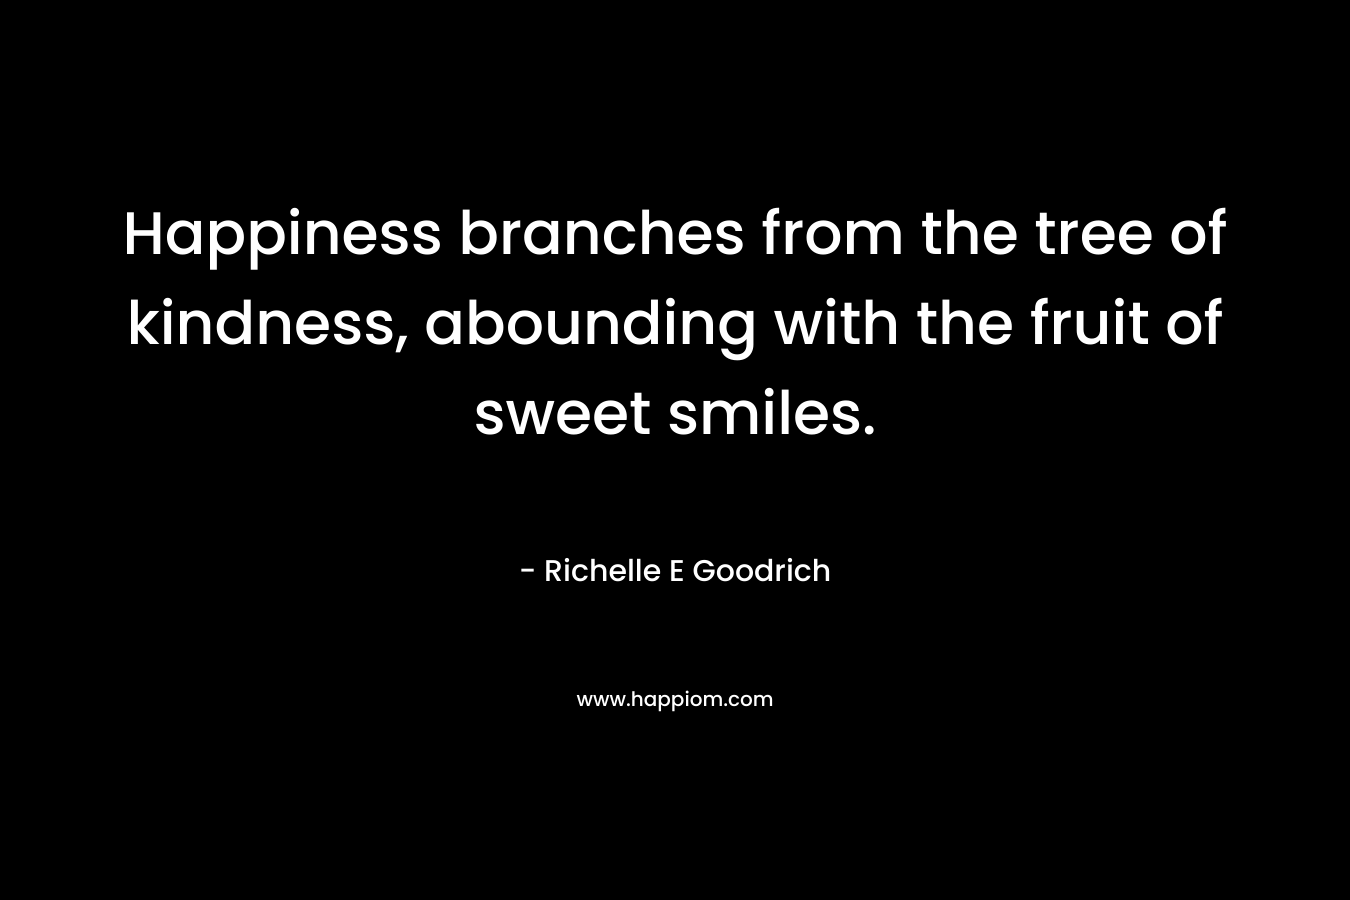 Happiness branches from the tree of kindness, abounding with the fruit of sweet smiles.